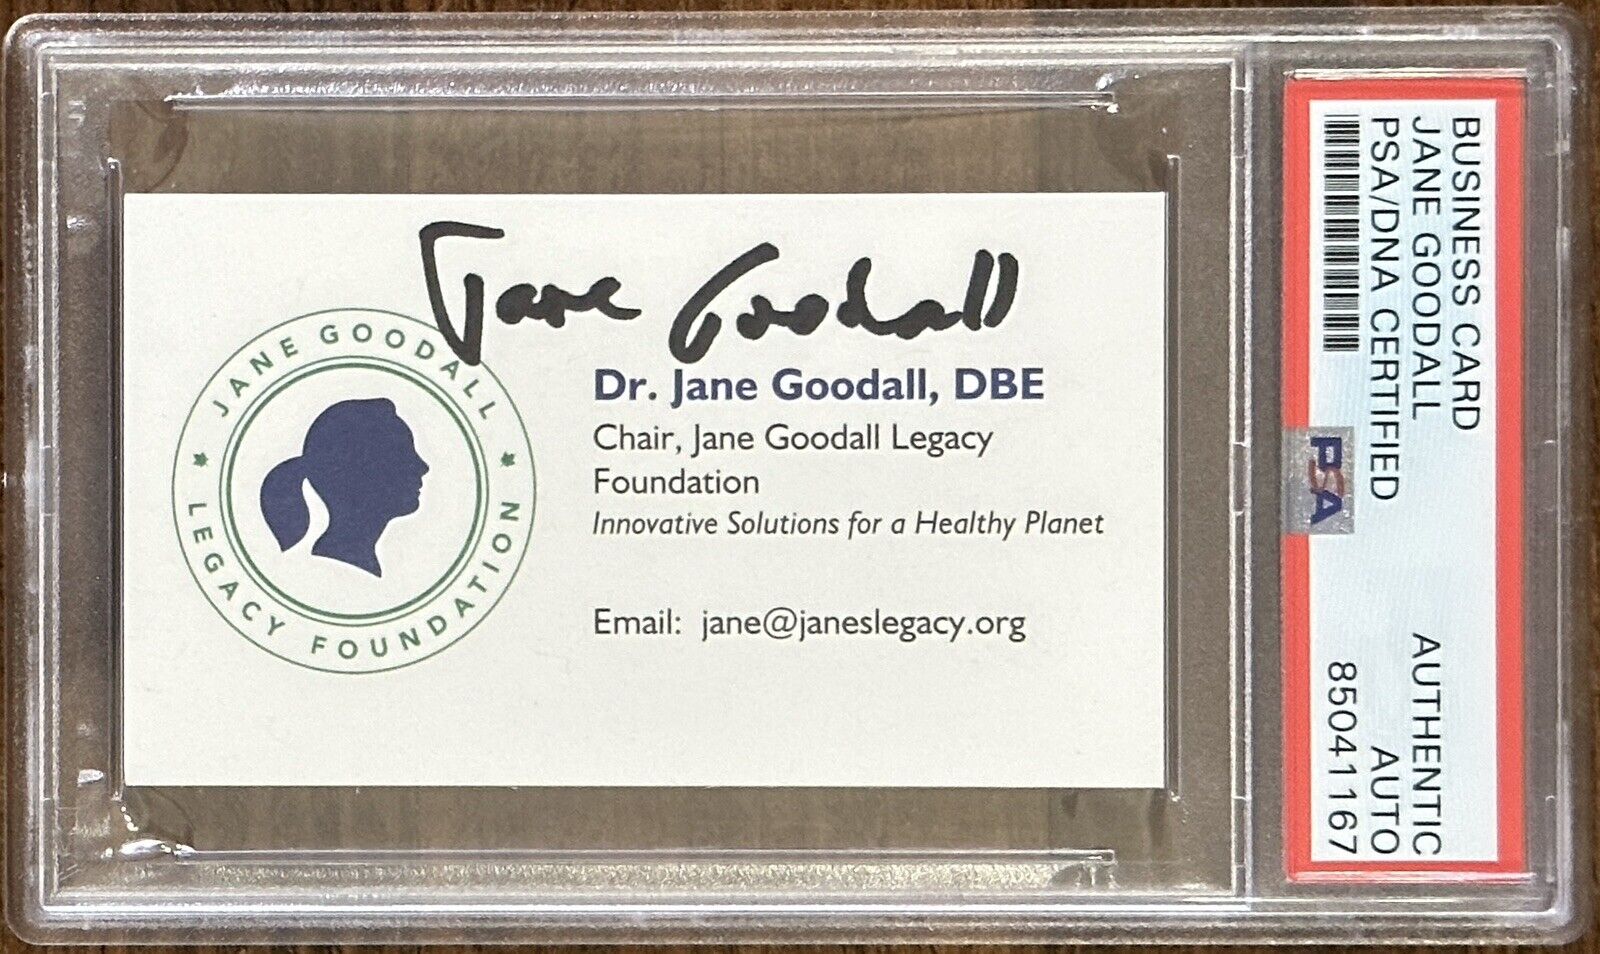 Chimp Expert Jane Goodall Autographed Business Card Signed PSA DNA Certified COA